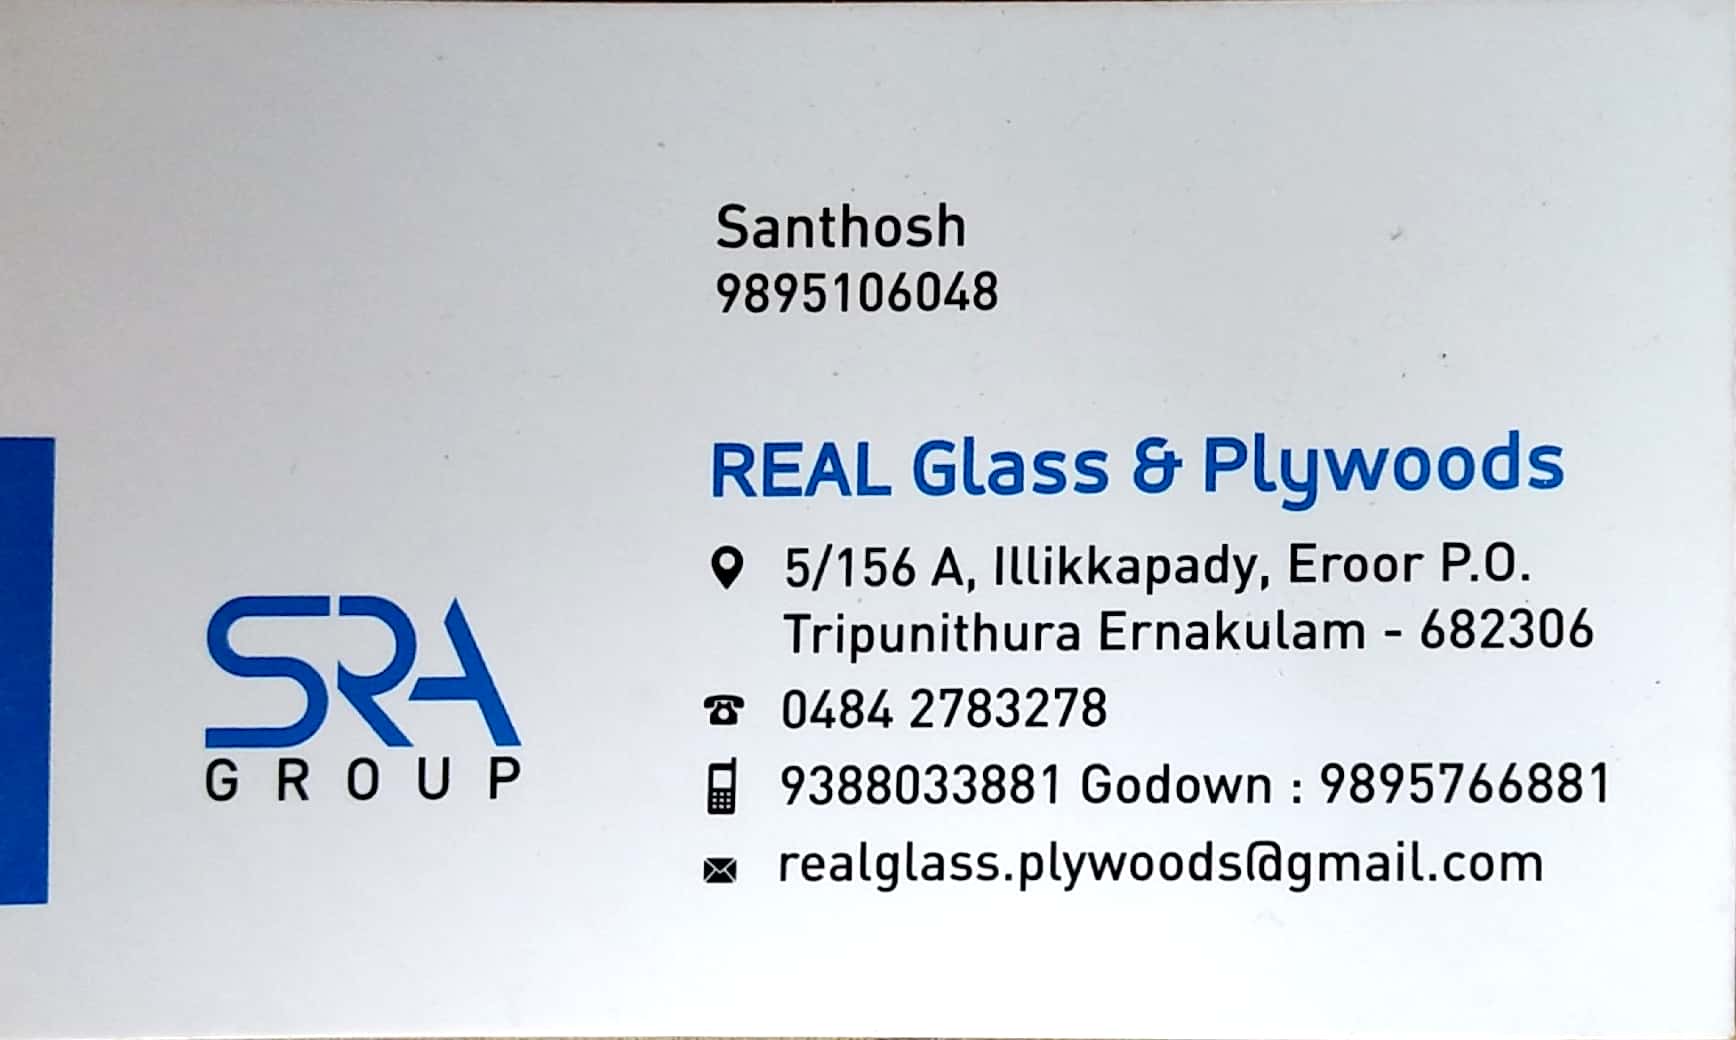 REAL GLASS & PLYWOODS, GLASS & PLYWOOD,  service in Thrippunithura, Ernakulam